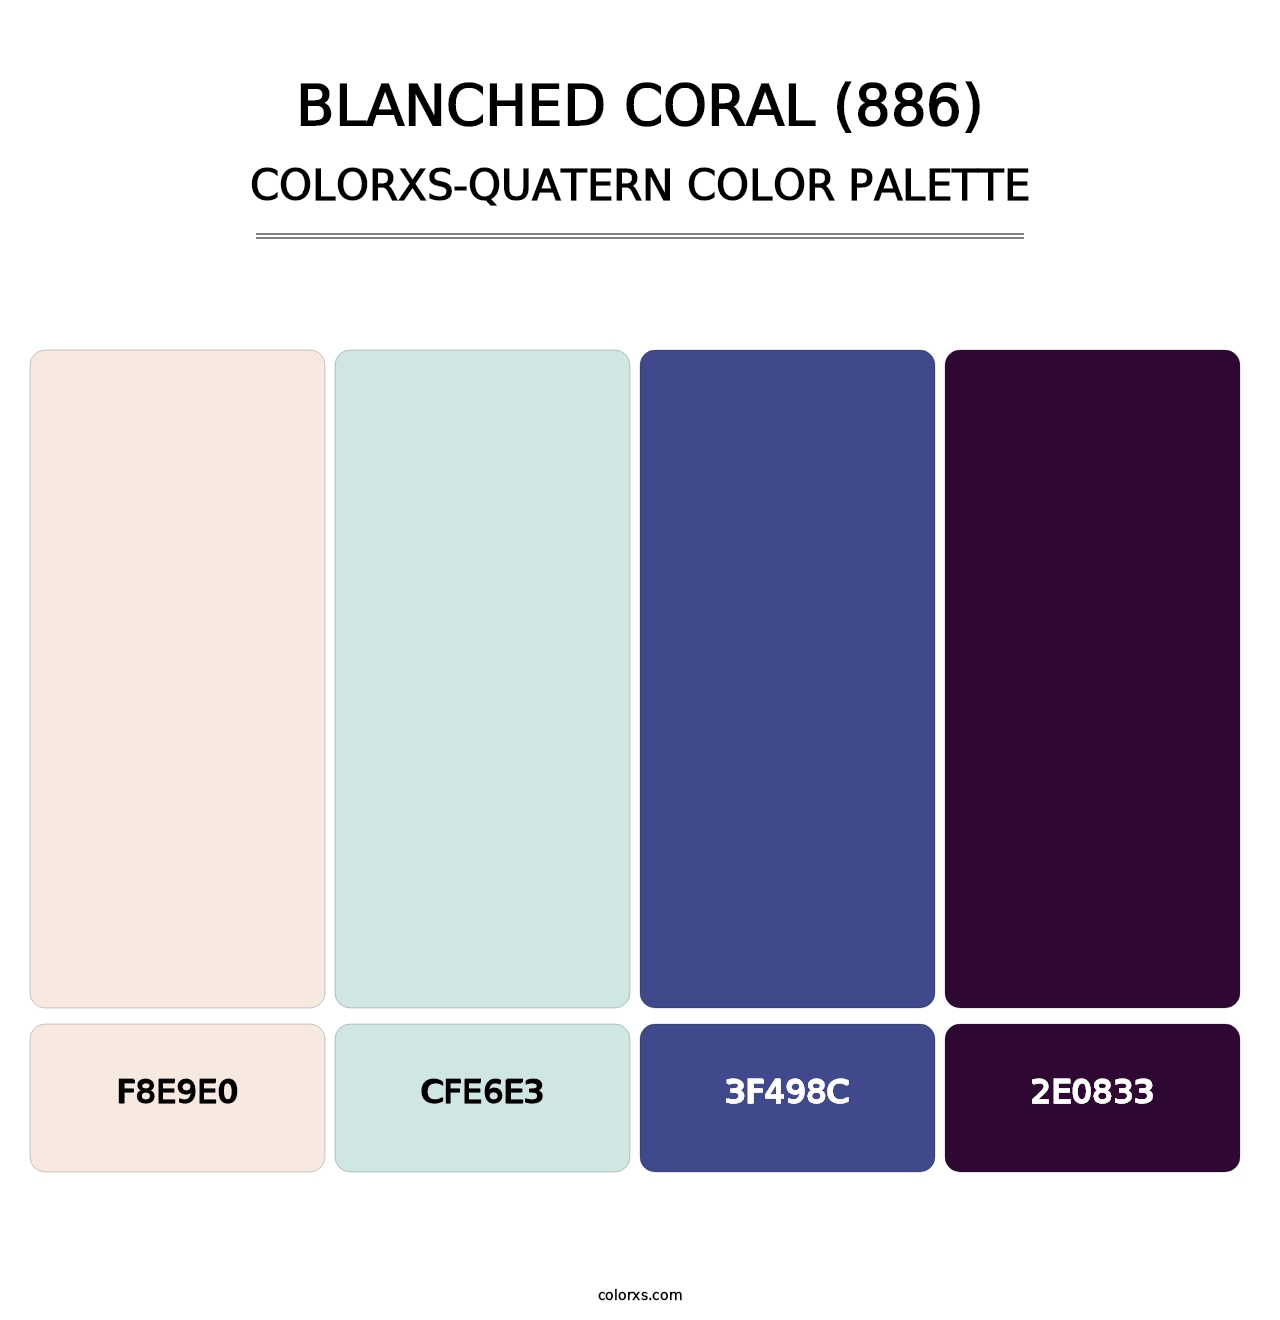 Blanched Coral (886) - Colorxs Quatern Palette